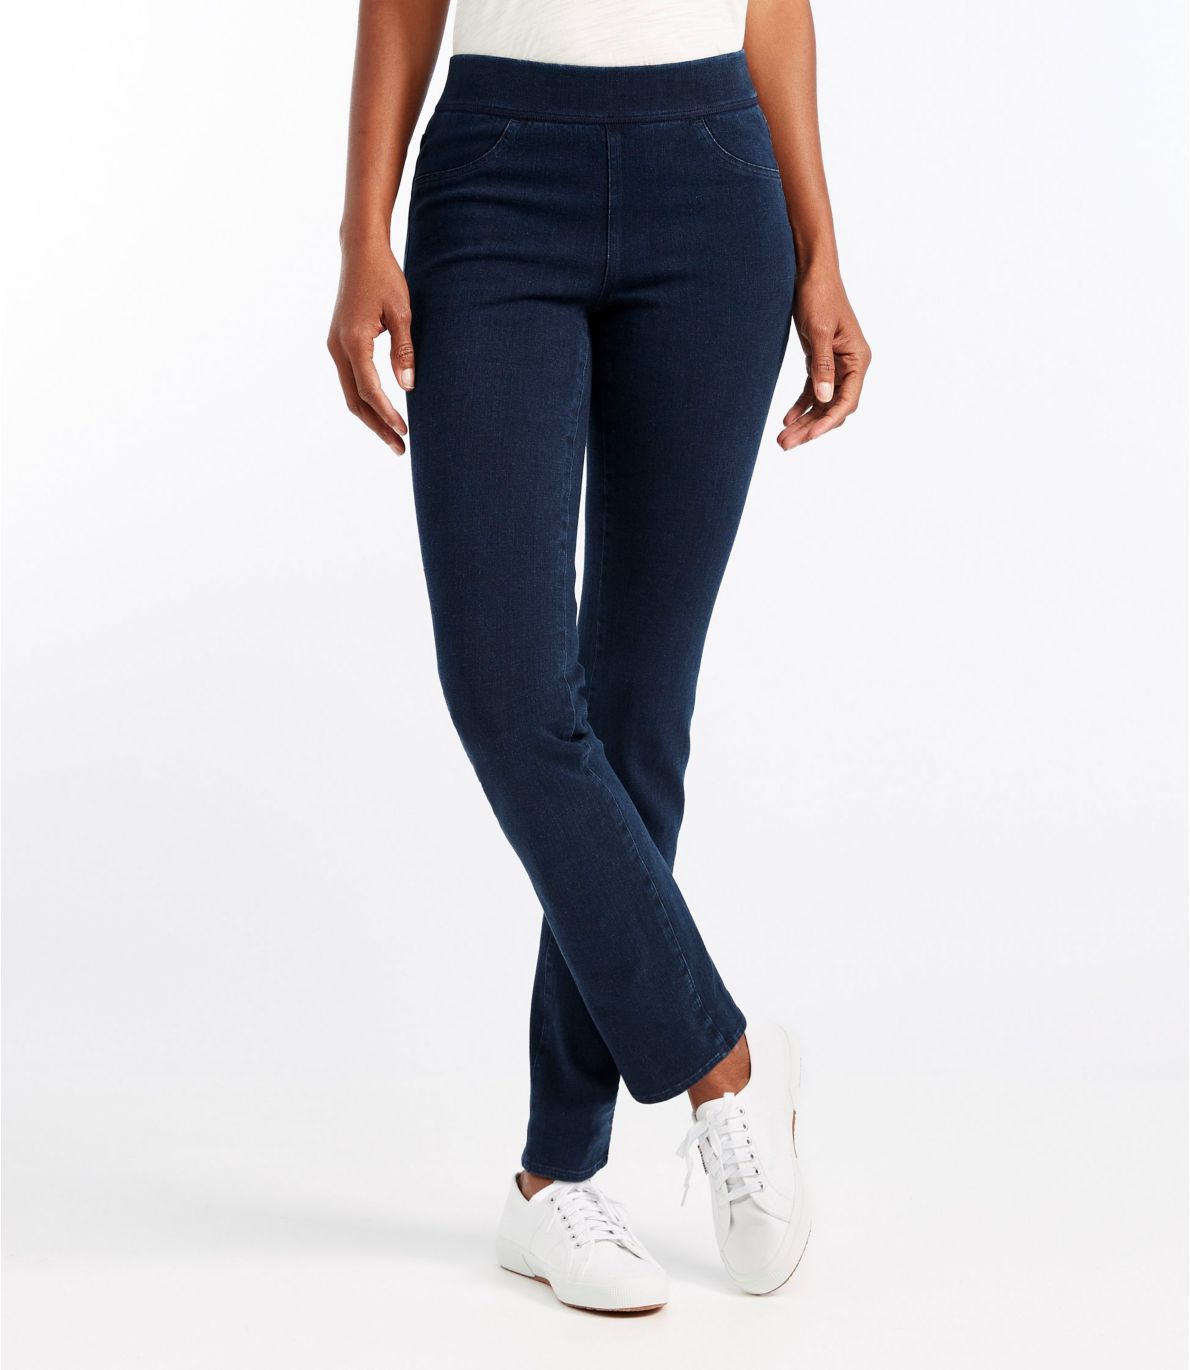 Women's Superstretch Slimming Pull-On Jeans, Classic Fit Straight-Leg